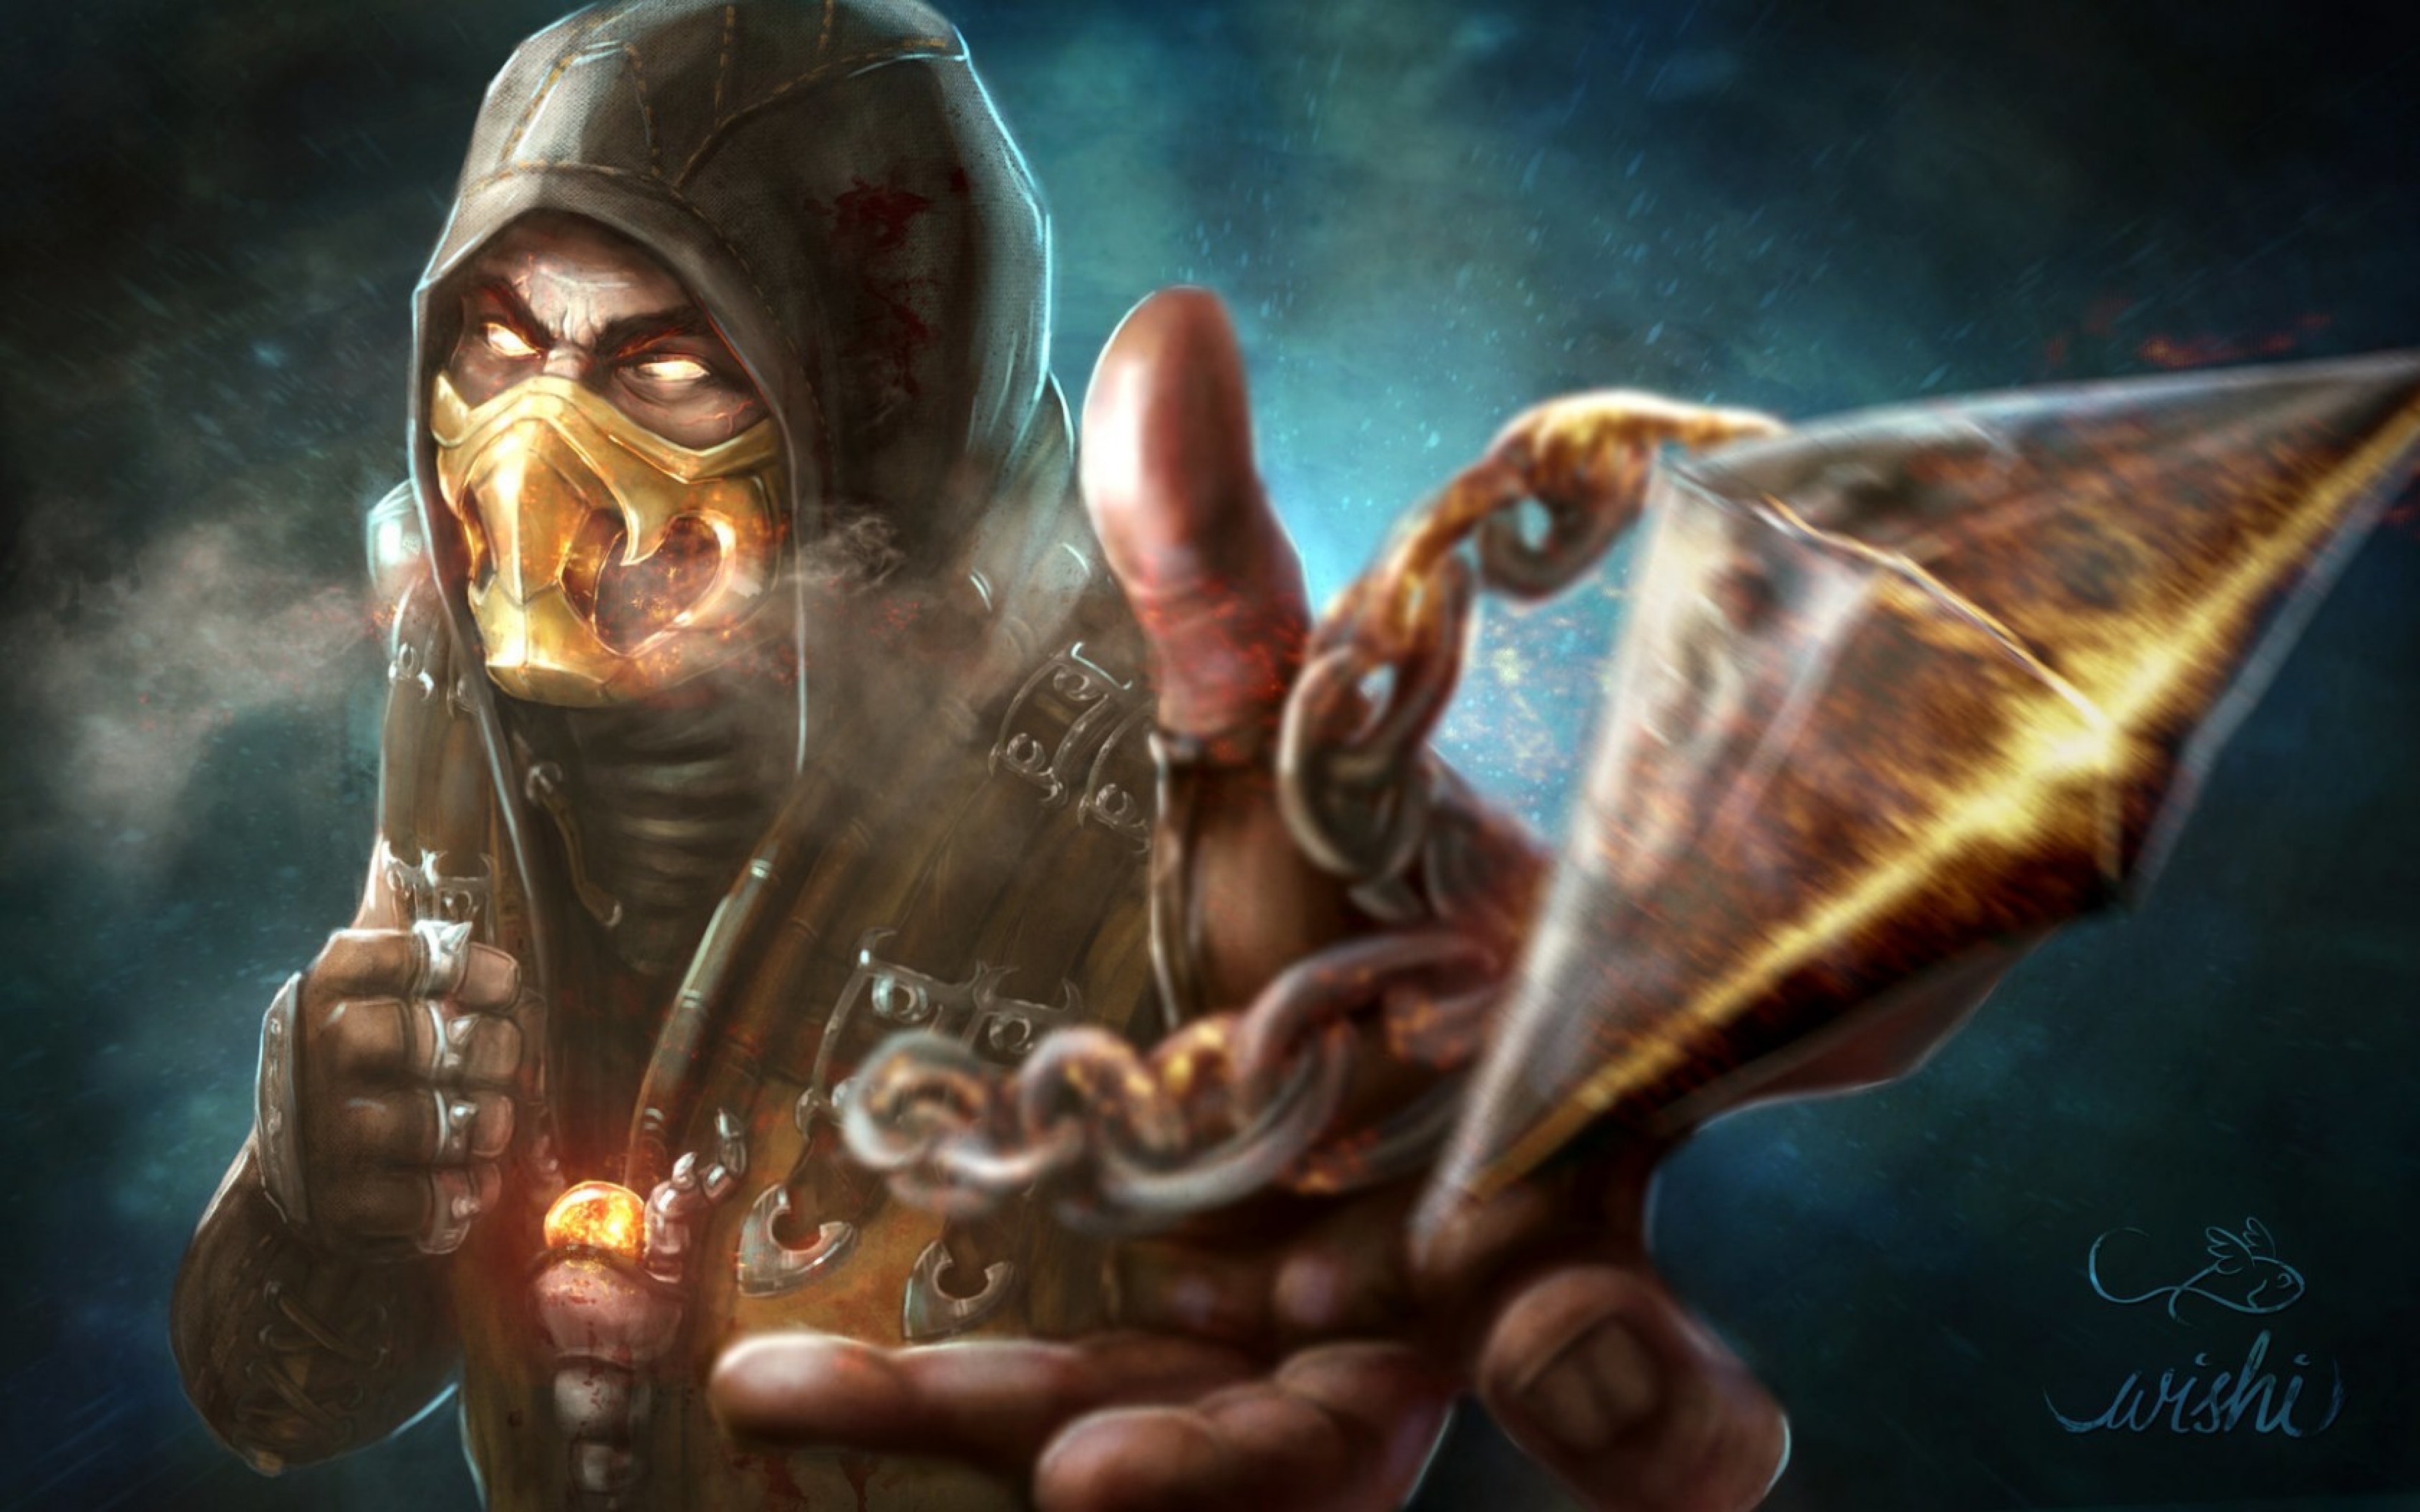 Mortal Kombat X Game: How to Download for Android, PC, iOS, Kindle